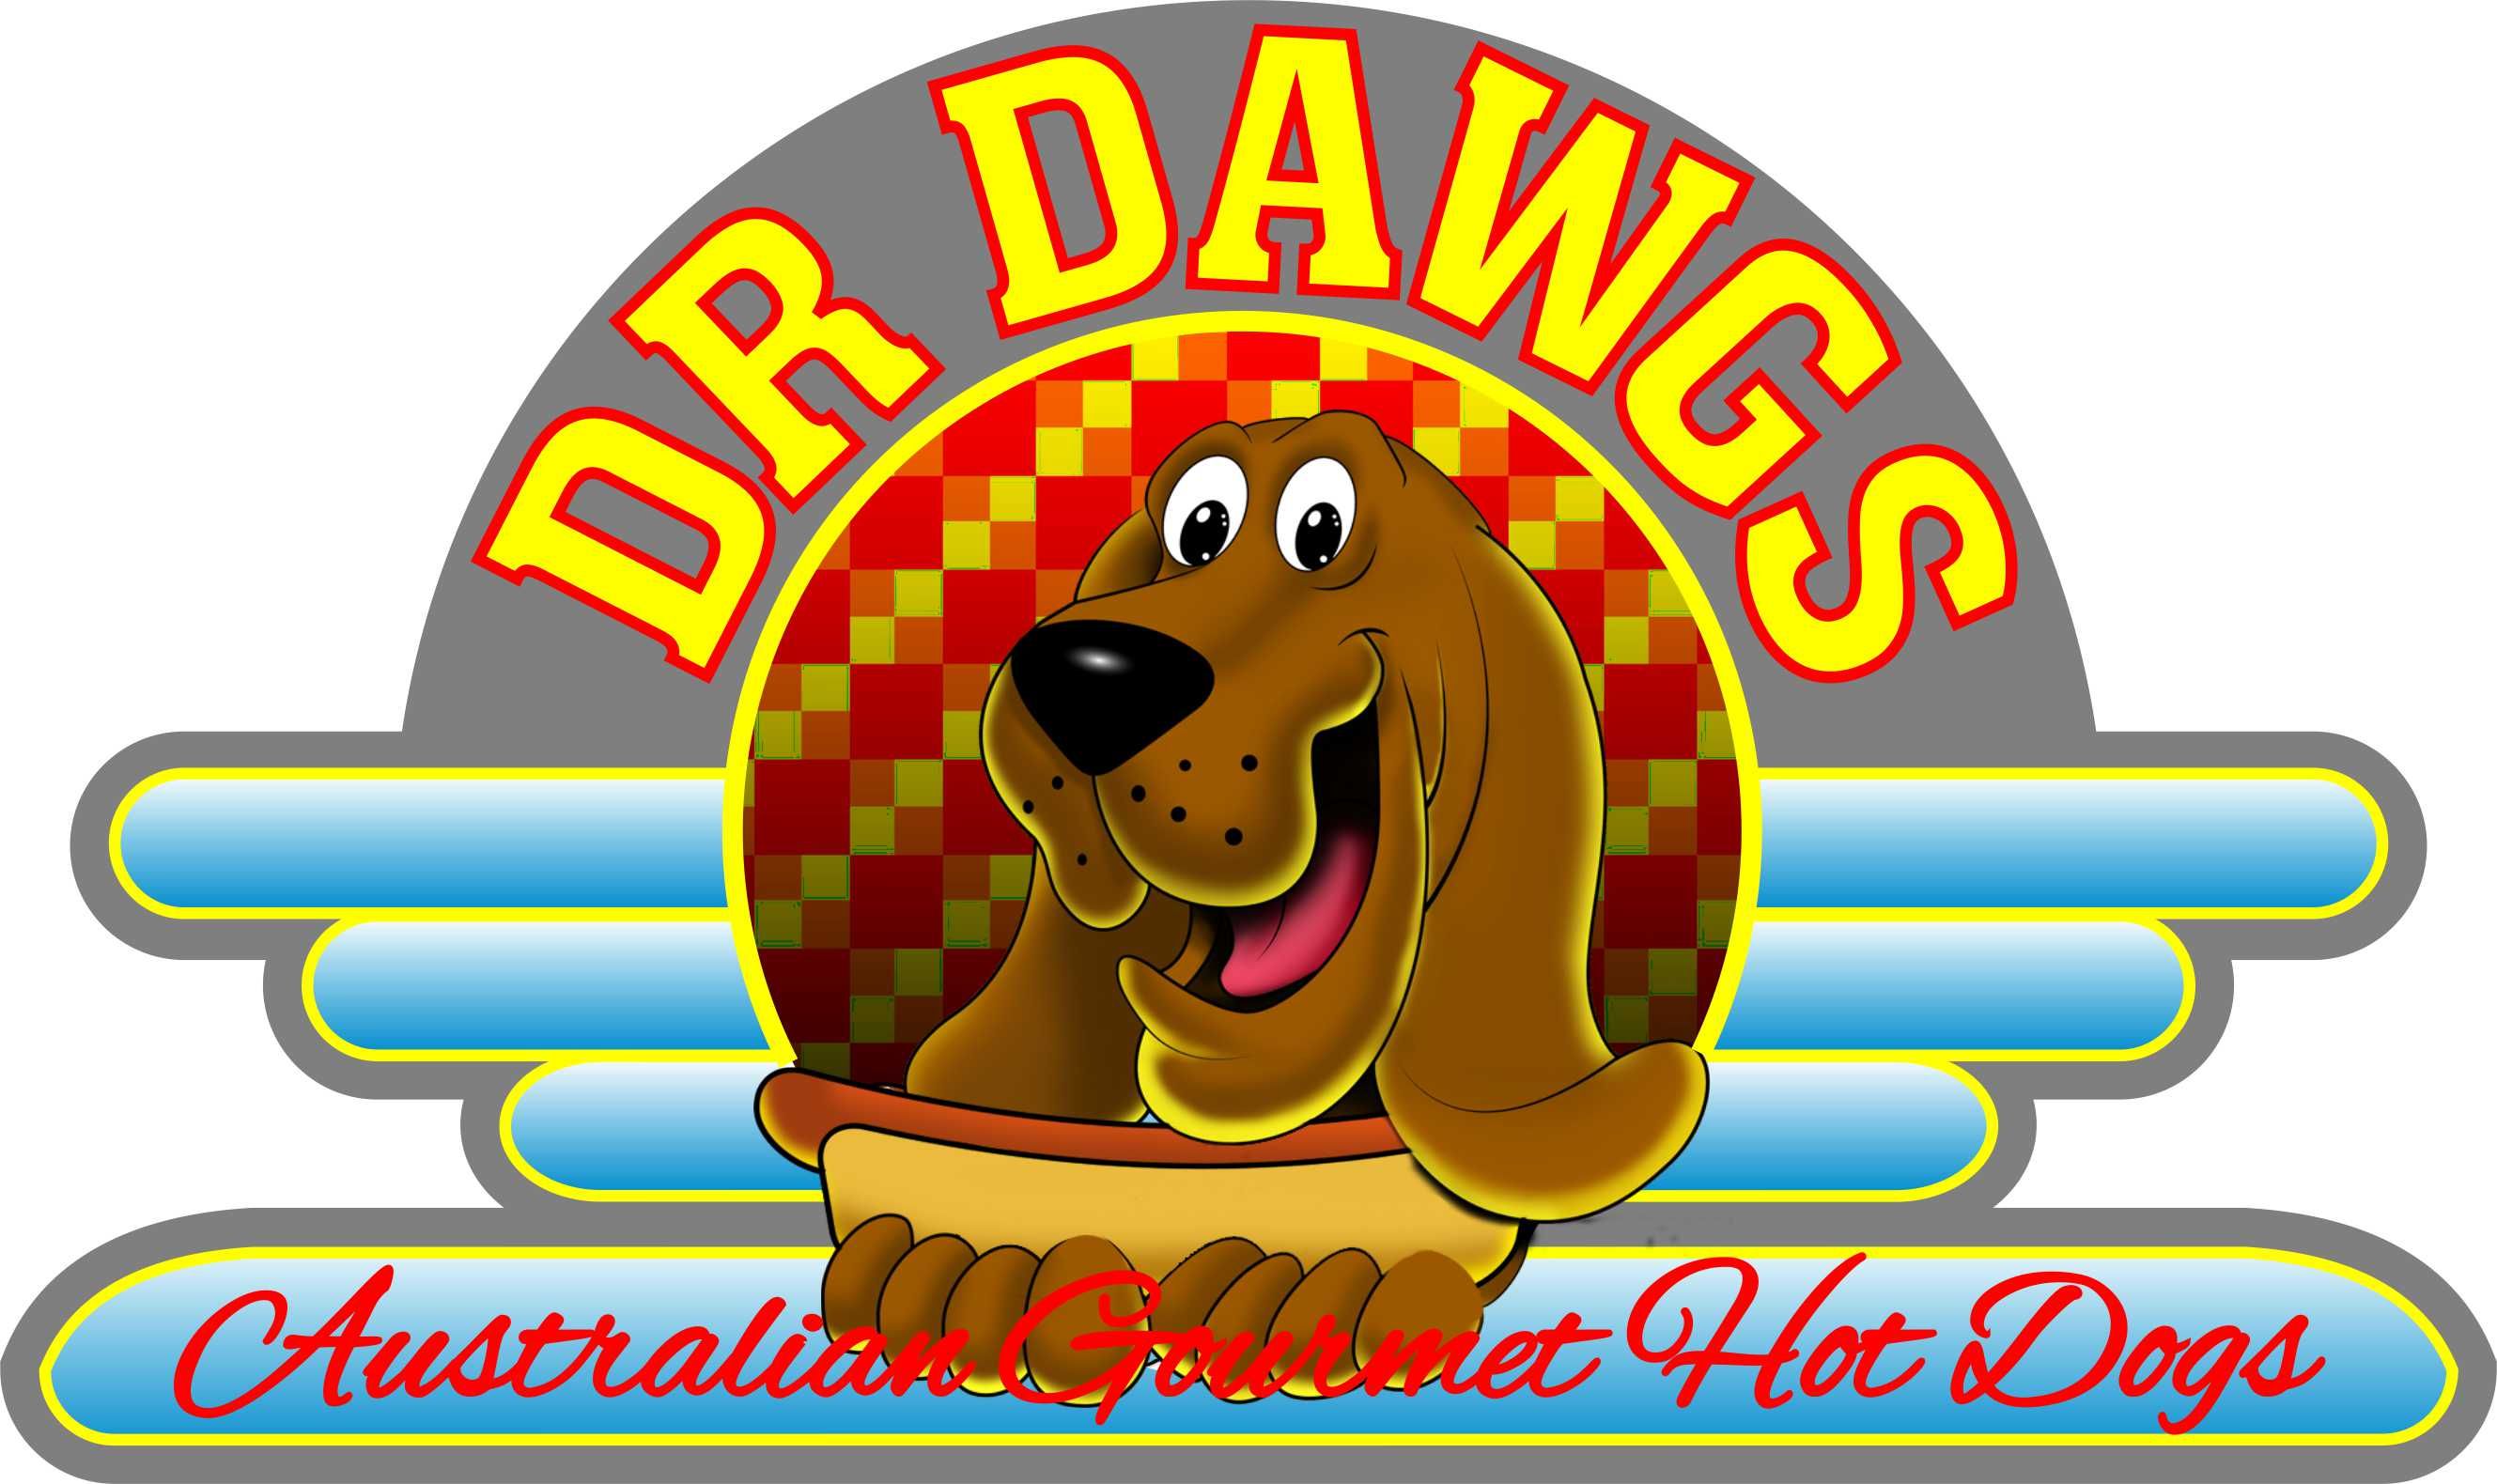 Dr Dawg’s Adelaide